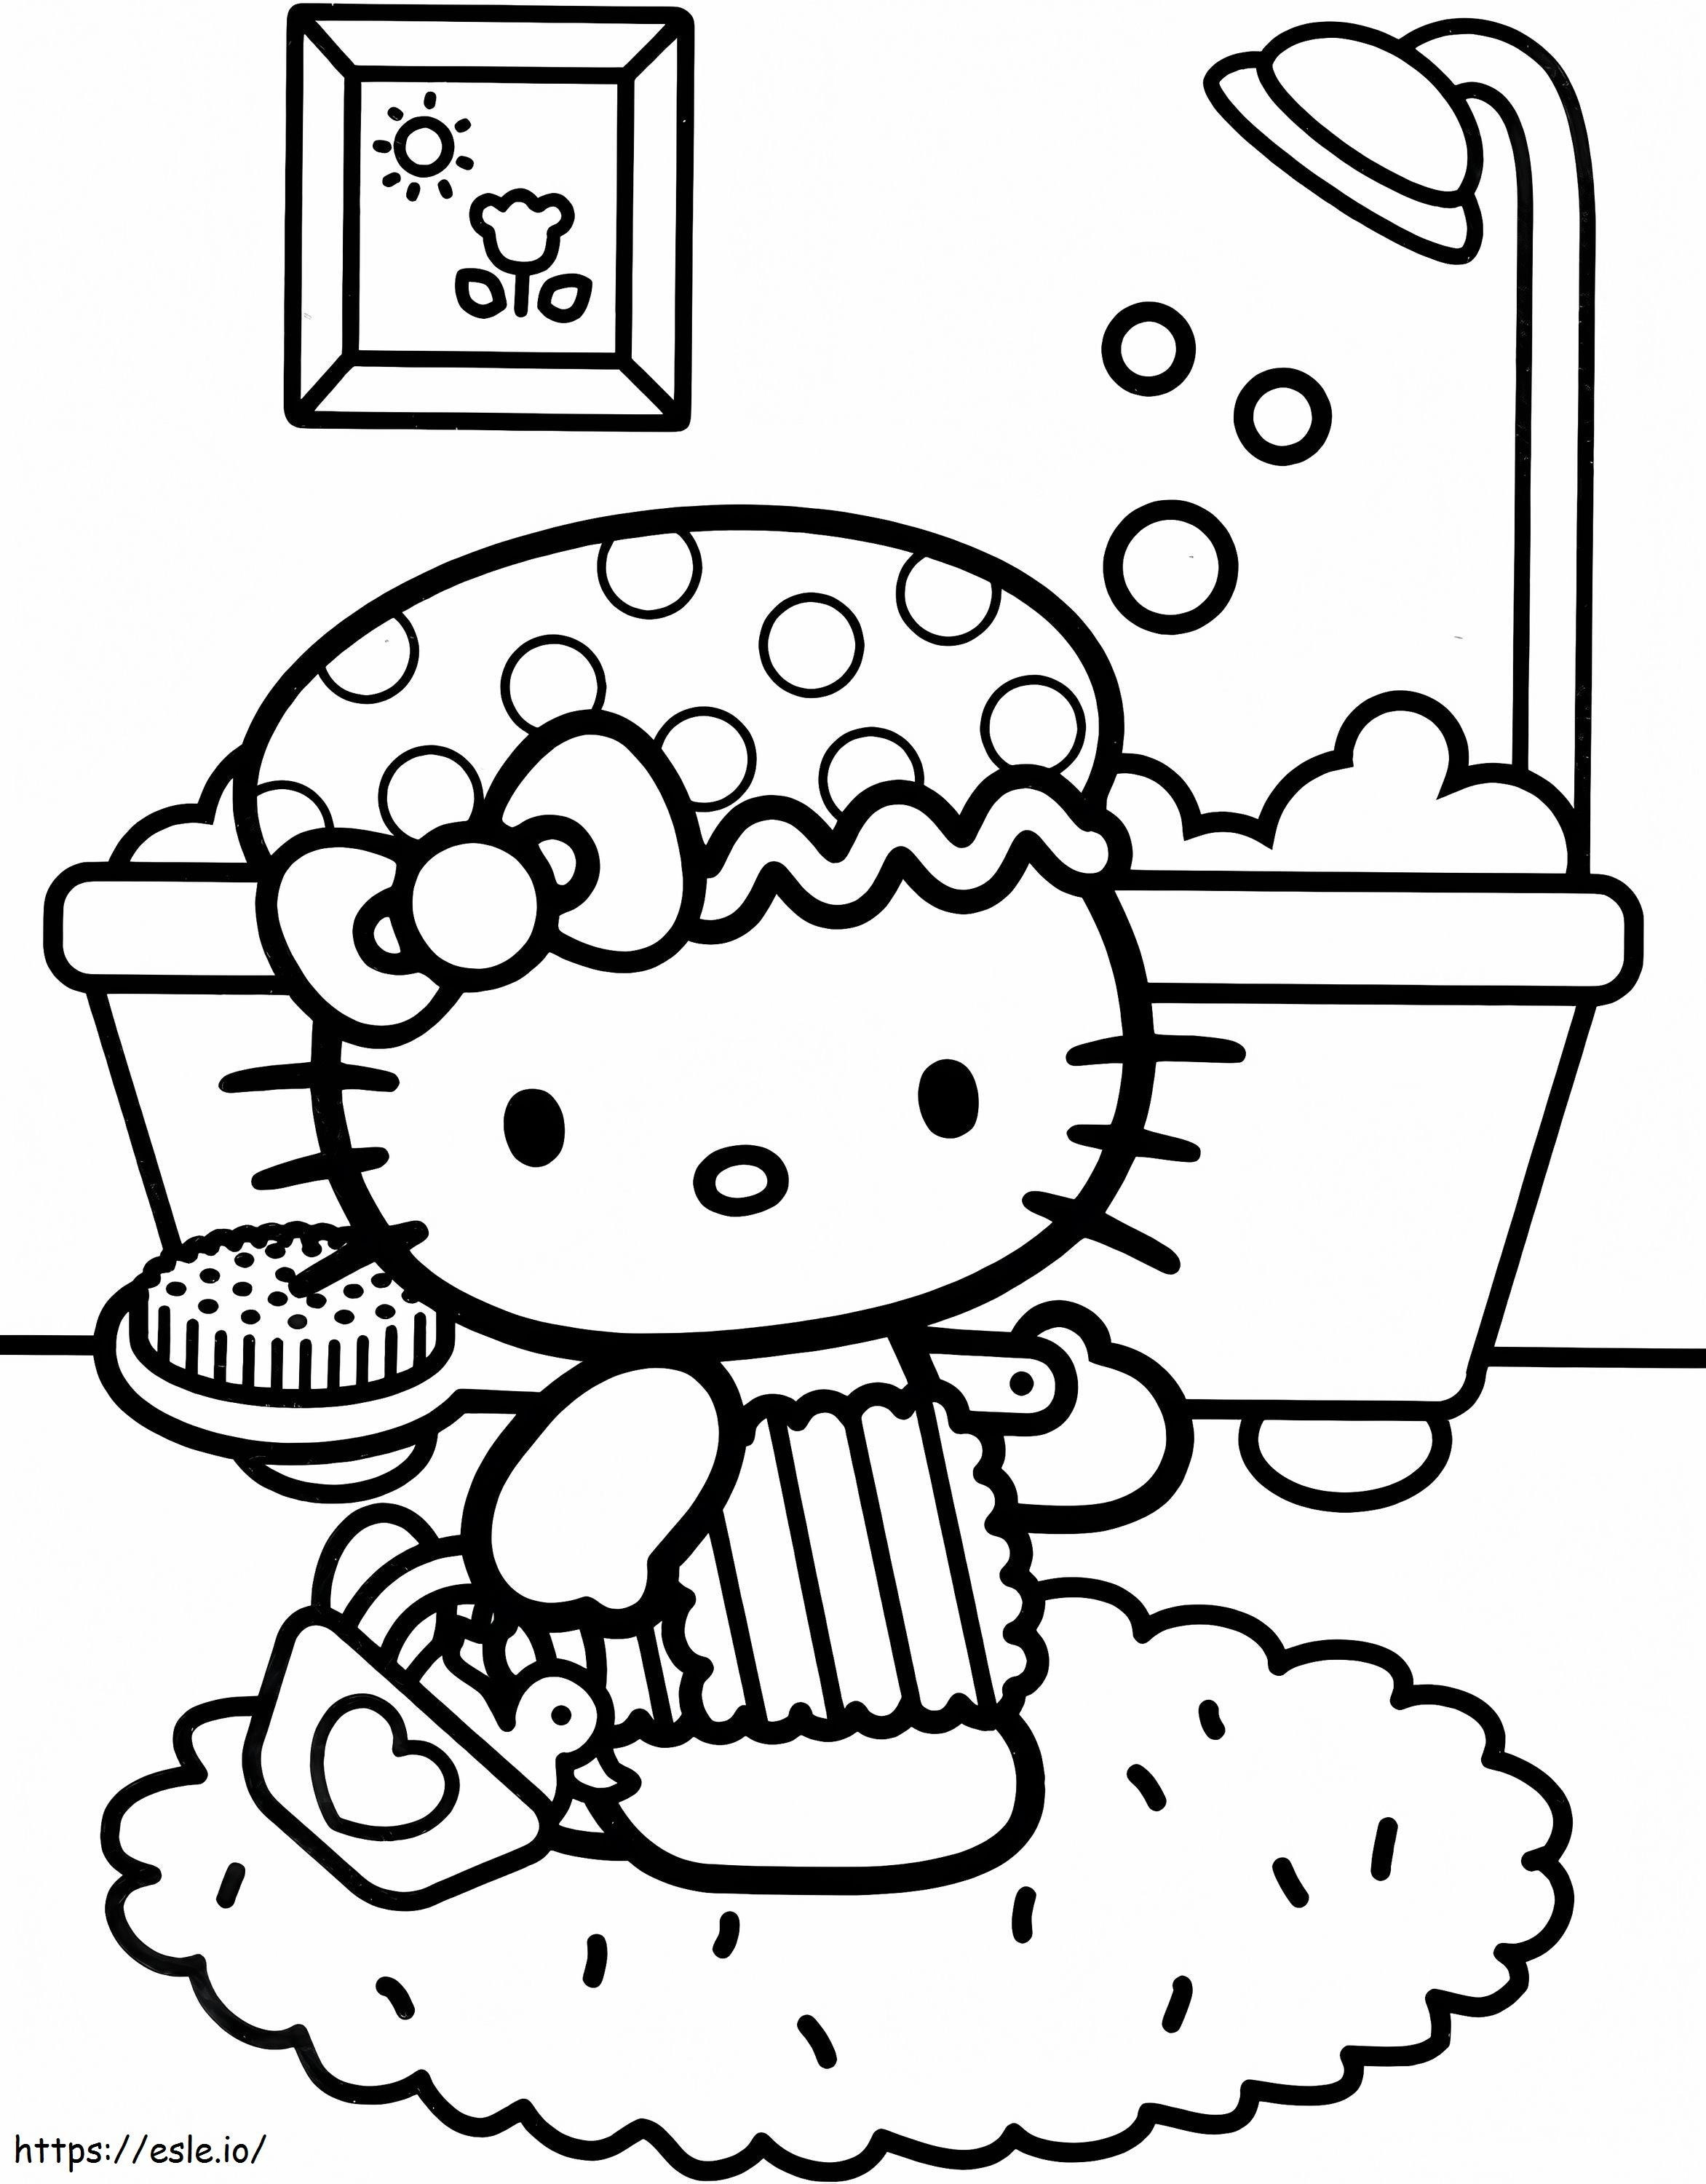 1539942426 Hello Kitty Princess 18 K Hello Kitty Shower Coloringstar coloring page